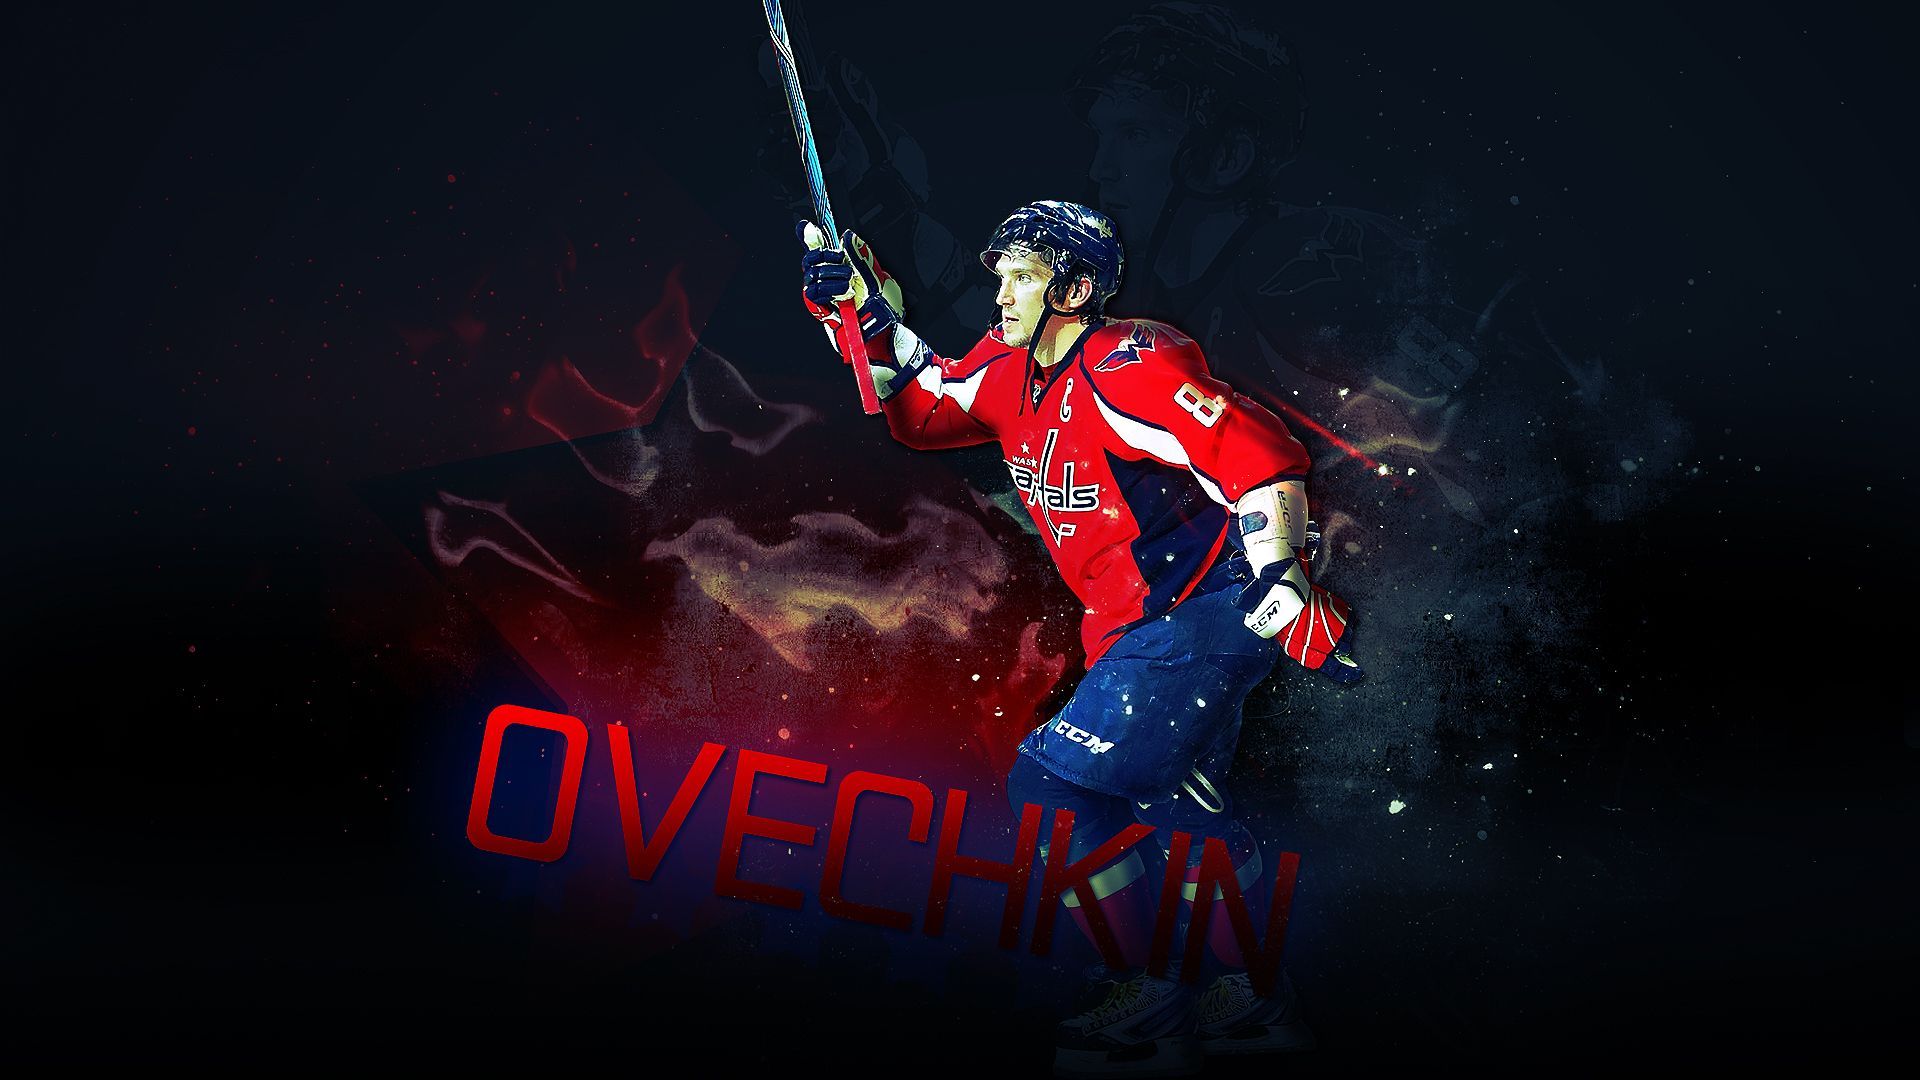 Famous Hockey player Alexander Ovechkin wallpapers and images